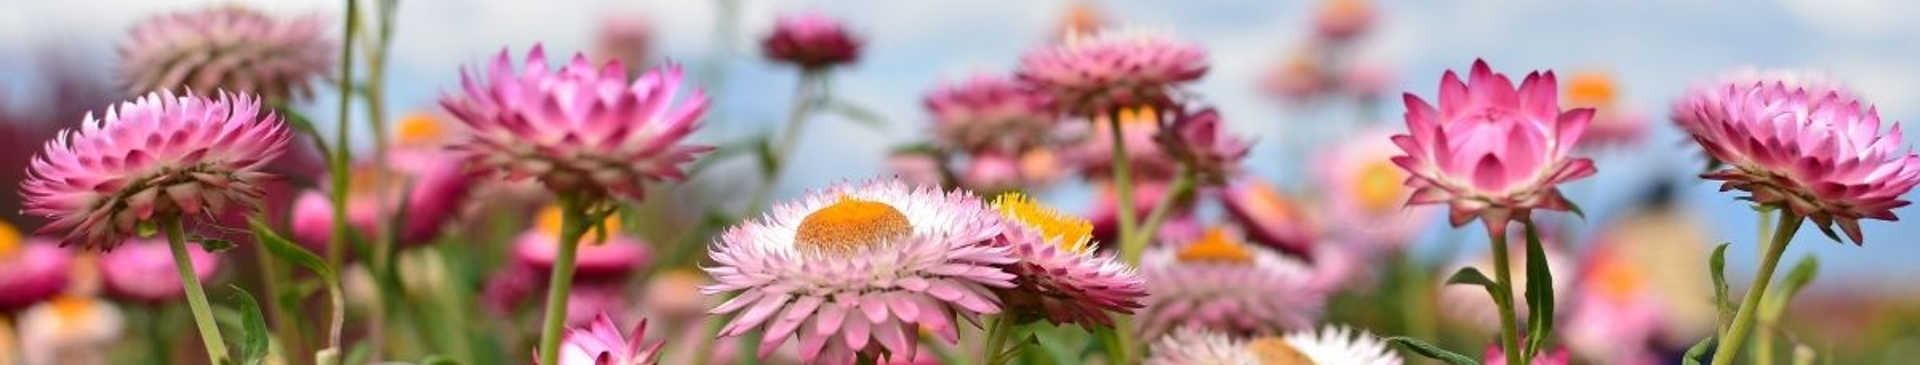 How to Grow Everlasting Daisies from Seed